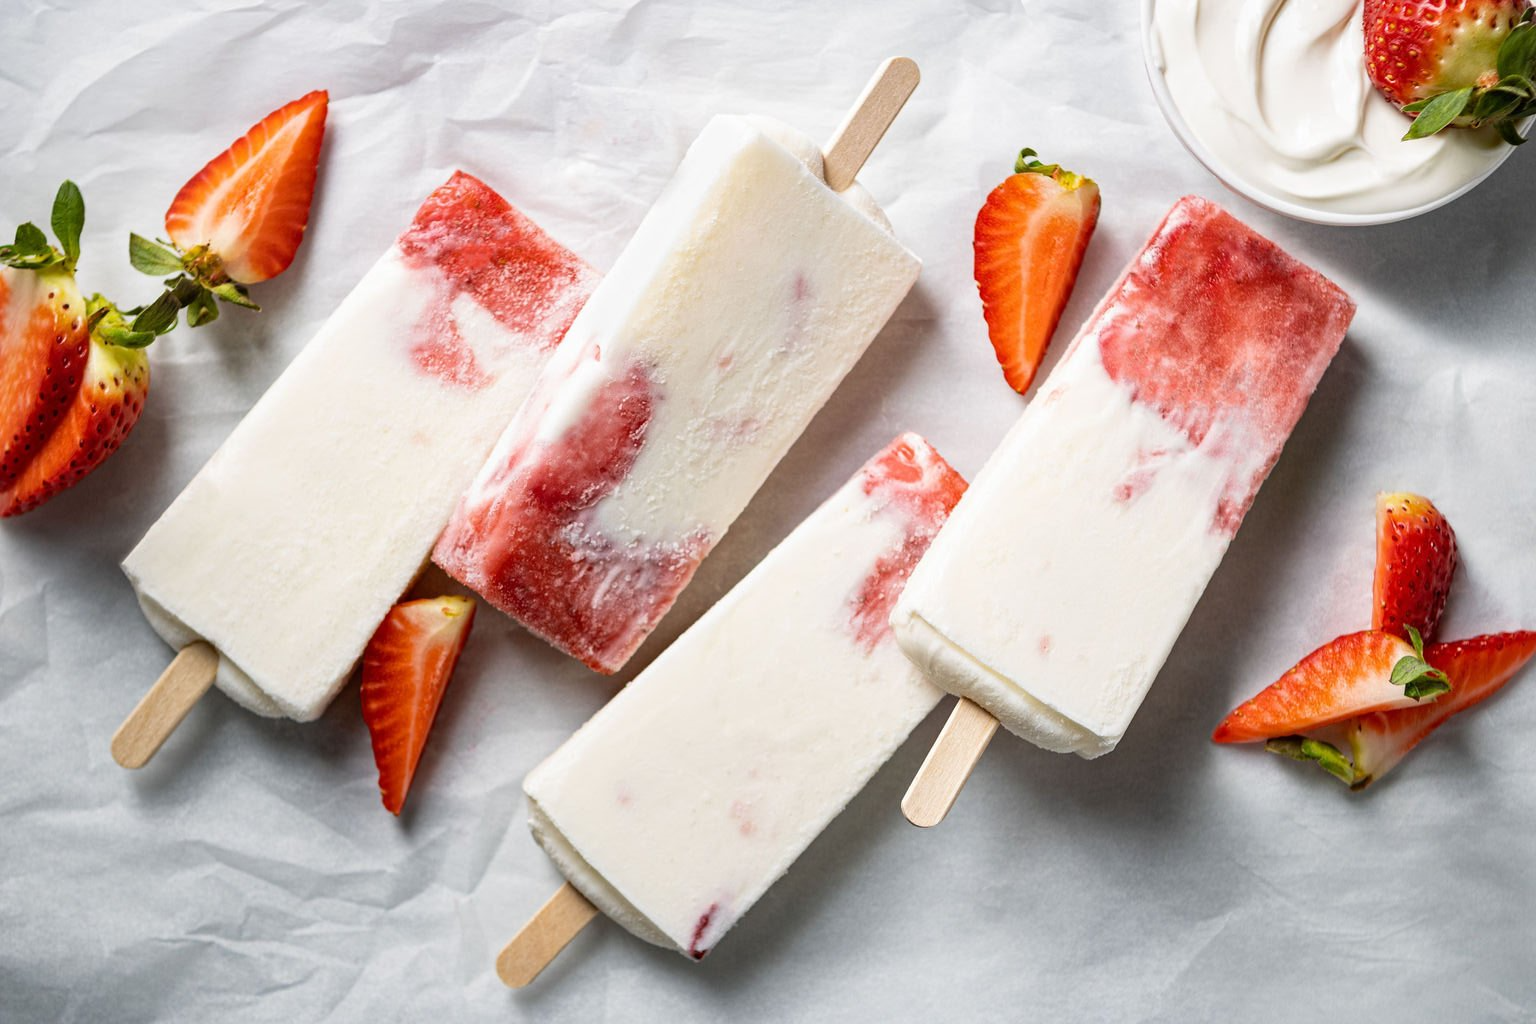 Strawberry-flavored popsicles